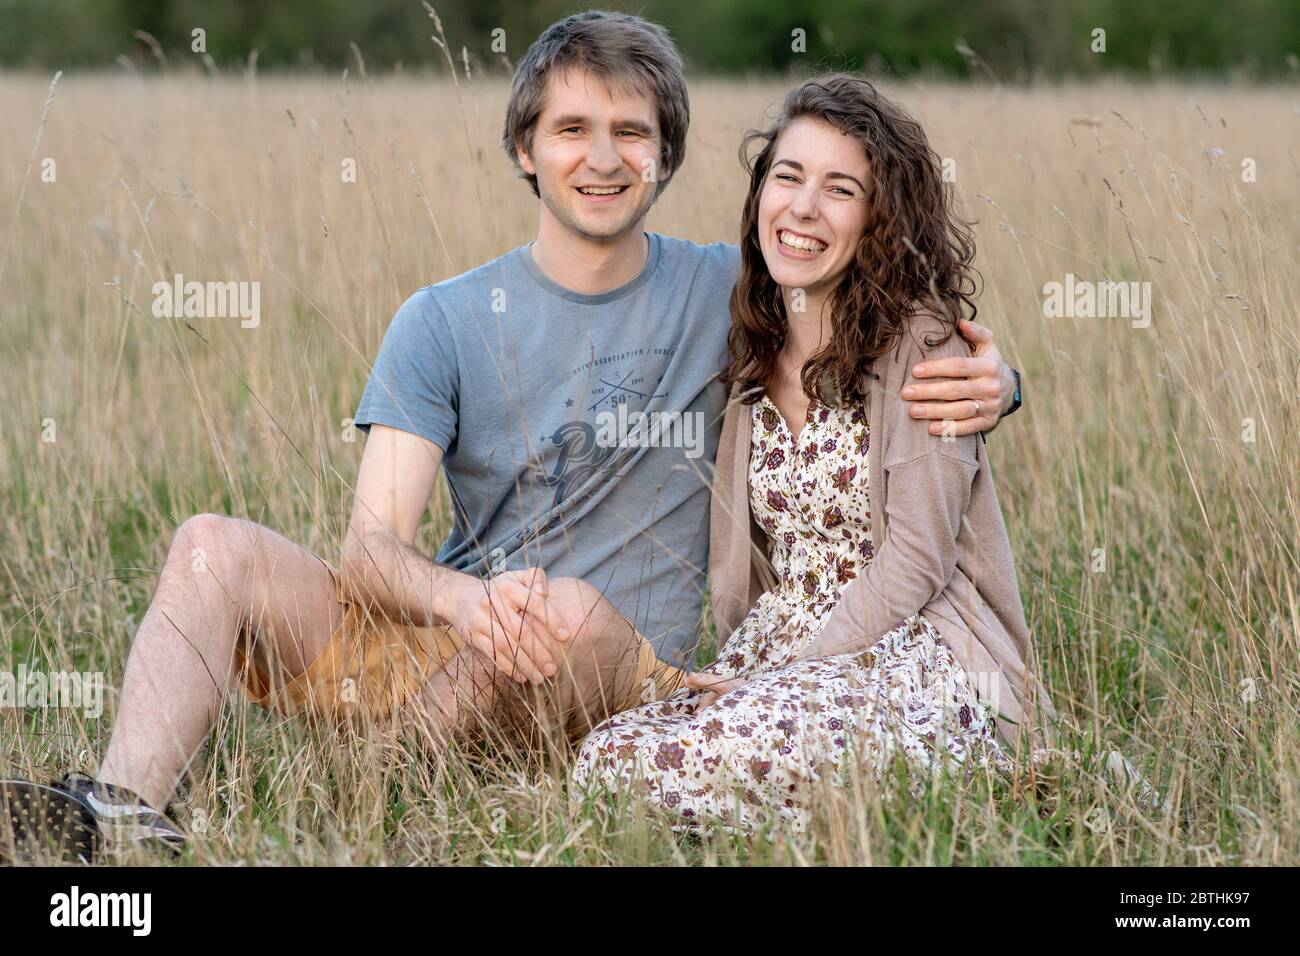 A young attractive beautiful couple smile together in a beautiful outdoor field showing their love for each other and kissing Stock Photo